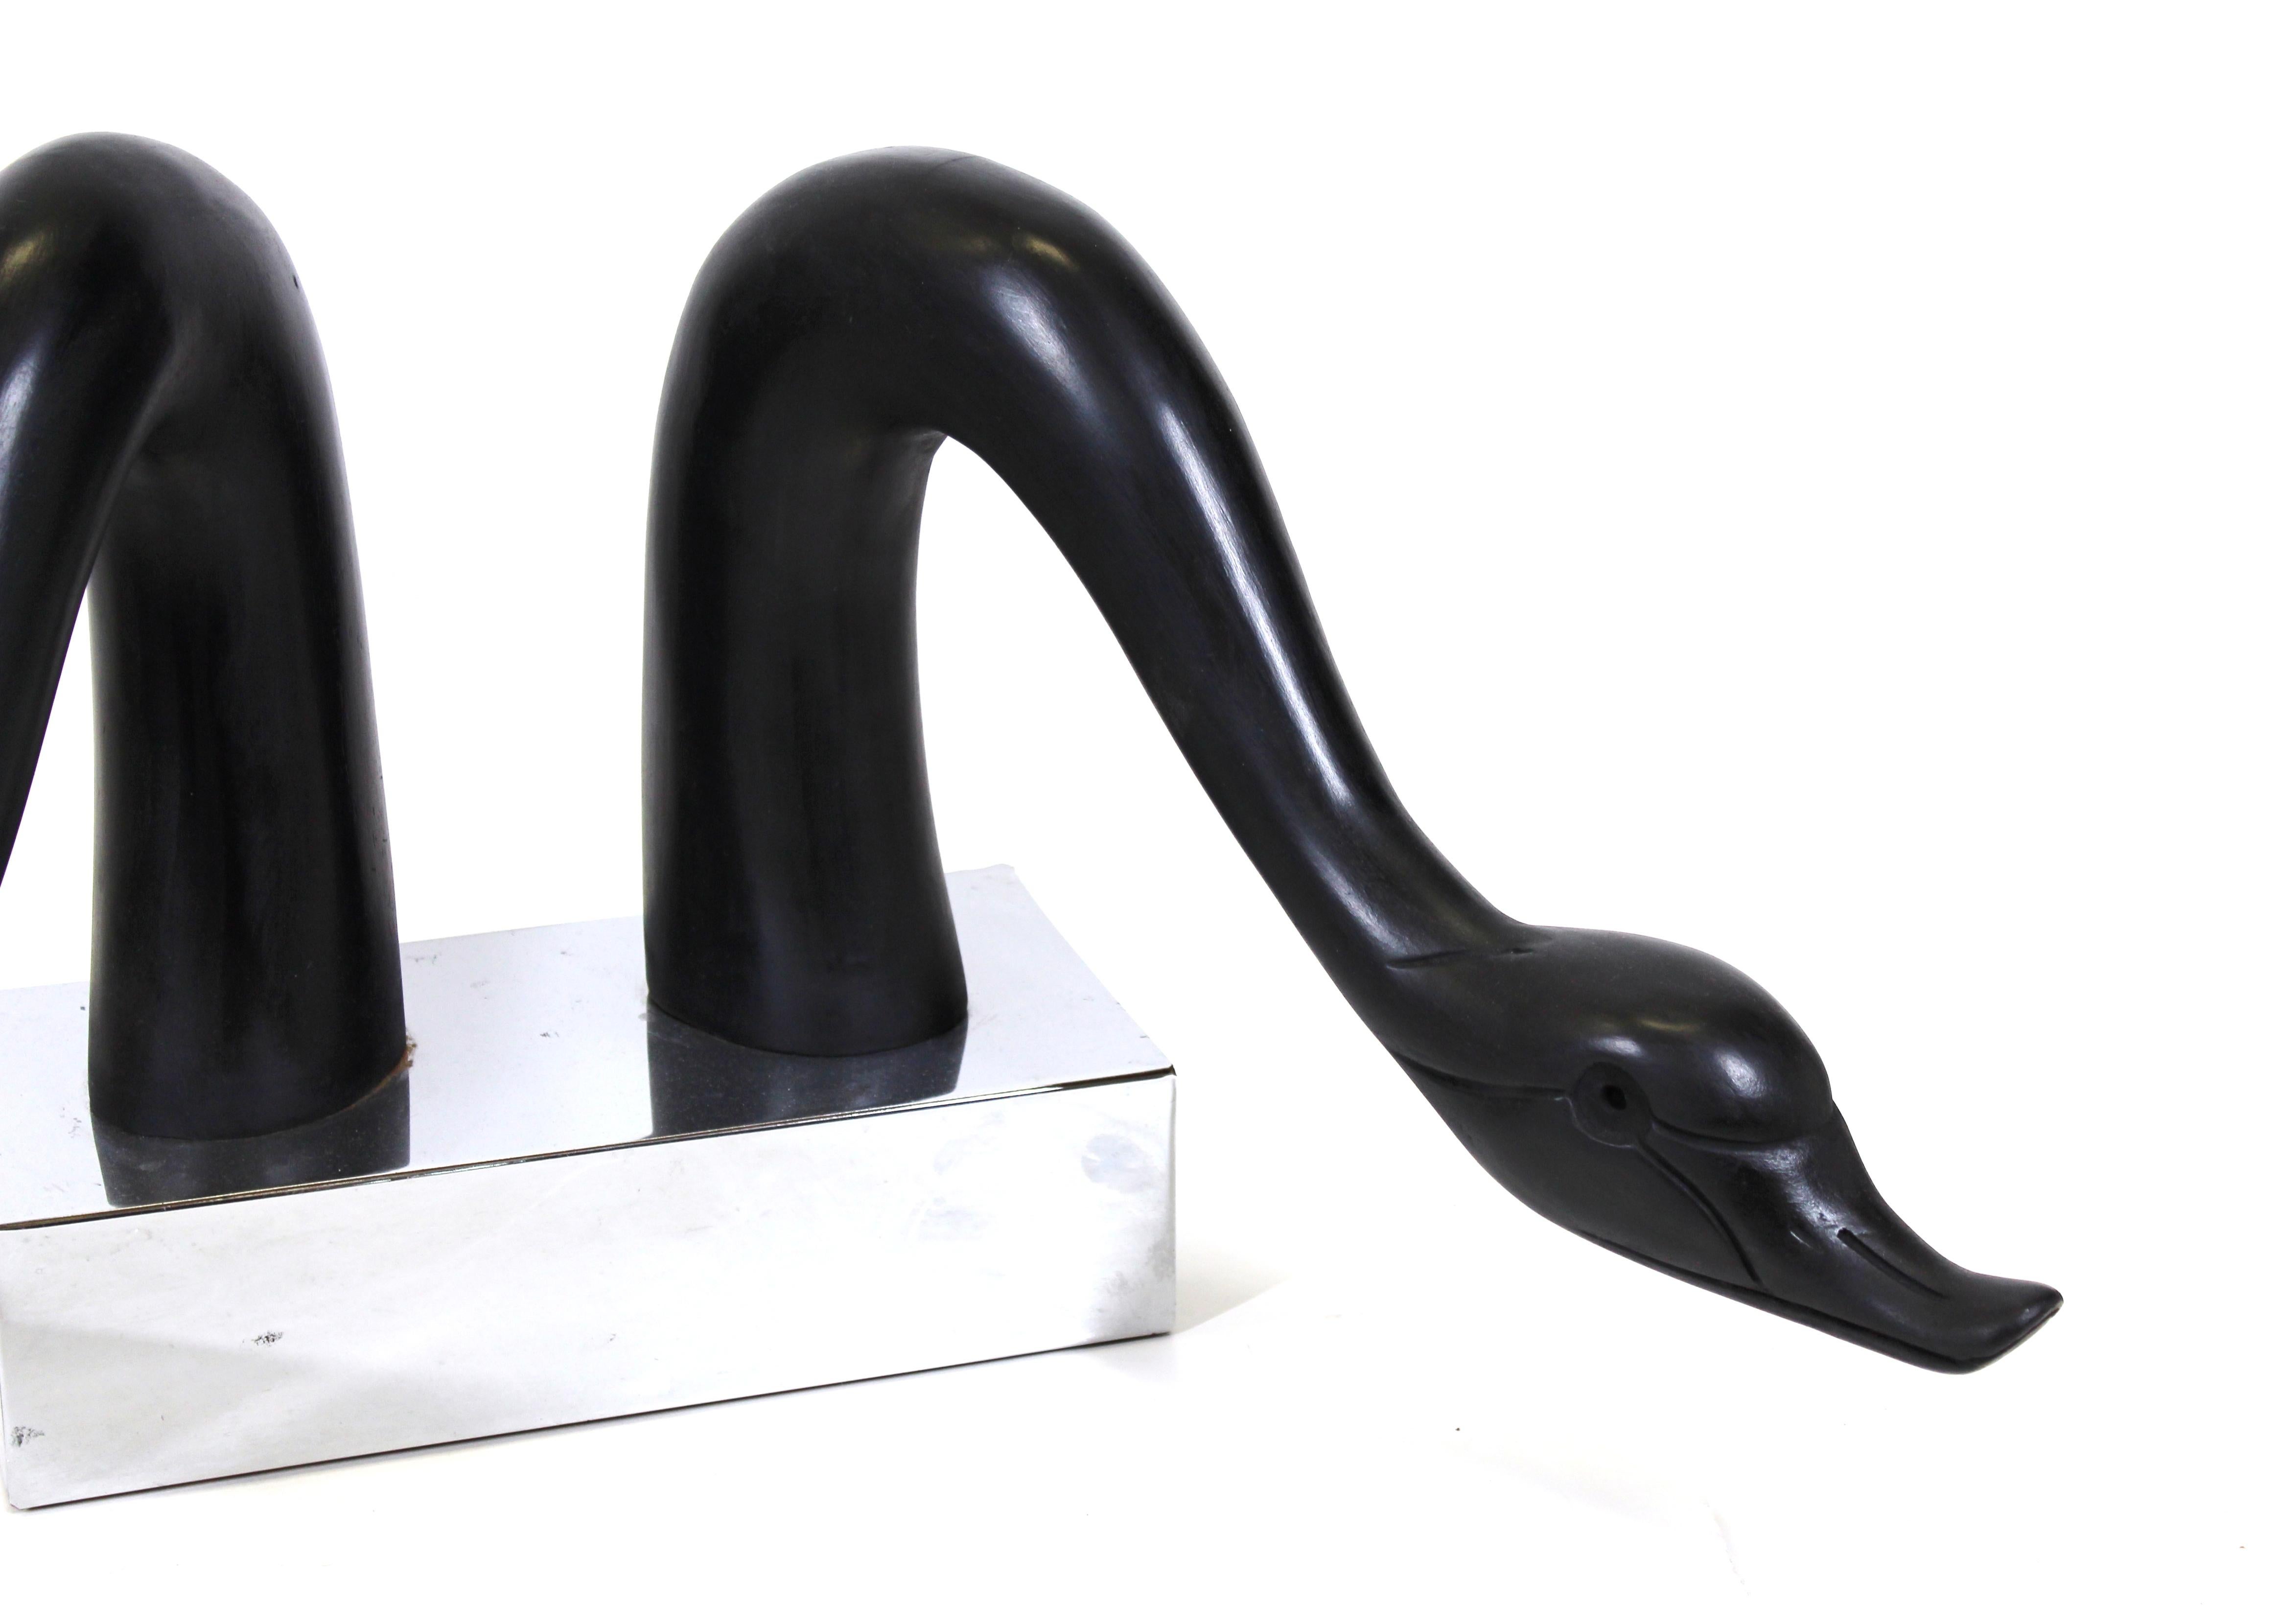 Asian Modern style pair of ebonized swan or goose heads mounted on a chromed base.